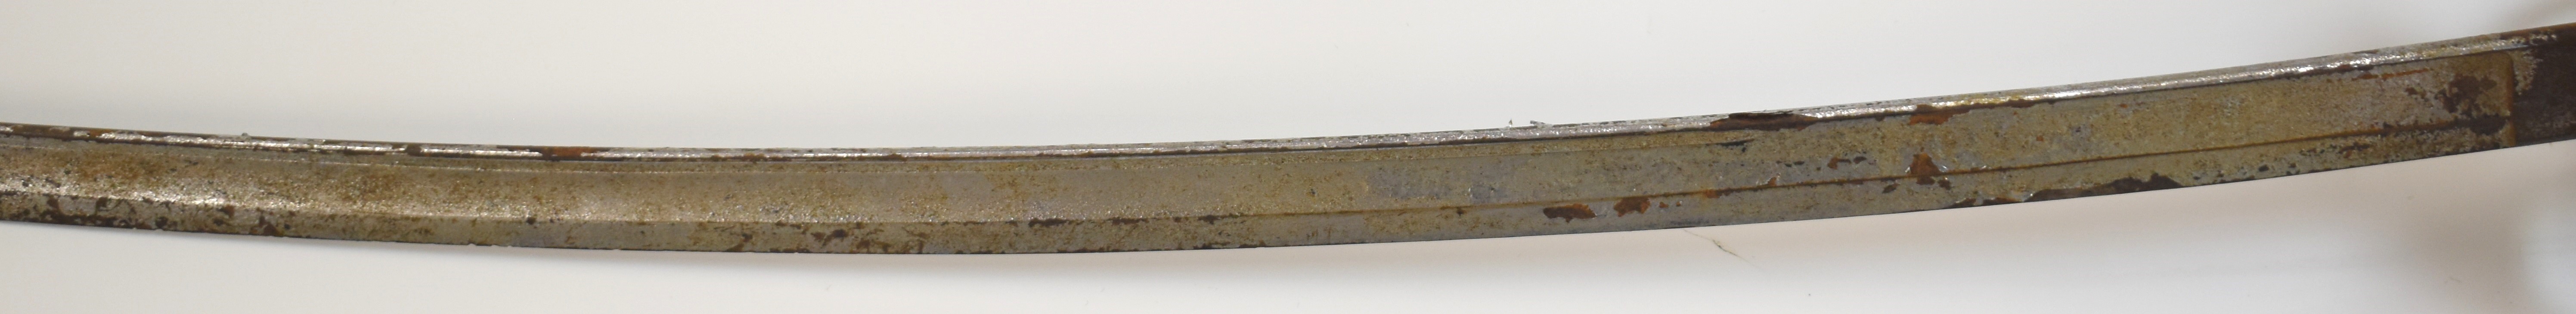 American Civil War sword with wooden grip, two bar hilt, US 1864 AGM to ricasso and Crosby - Image 12 of 26